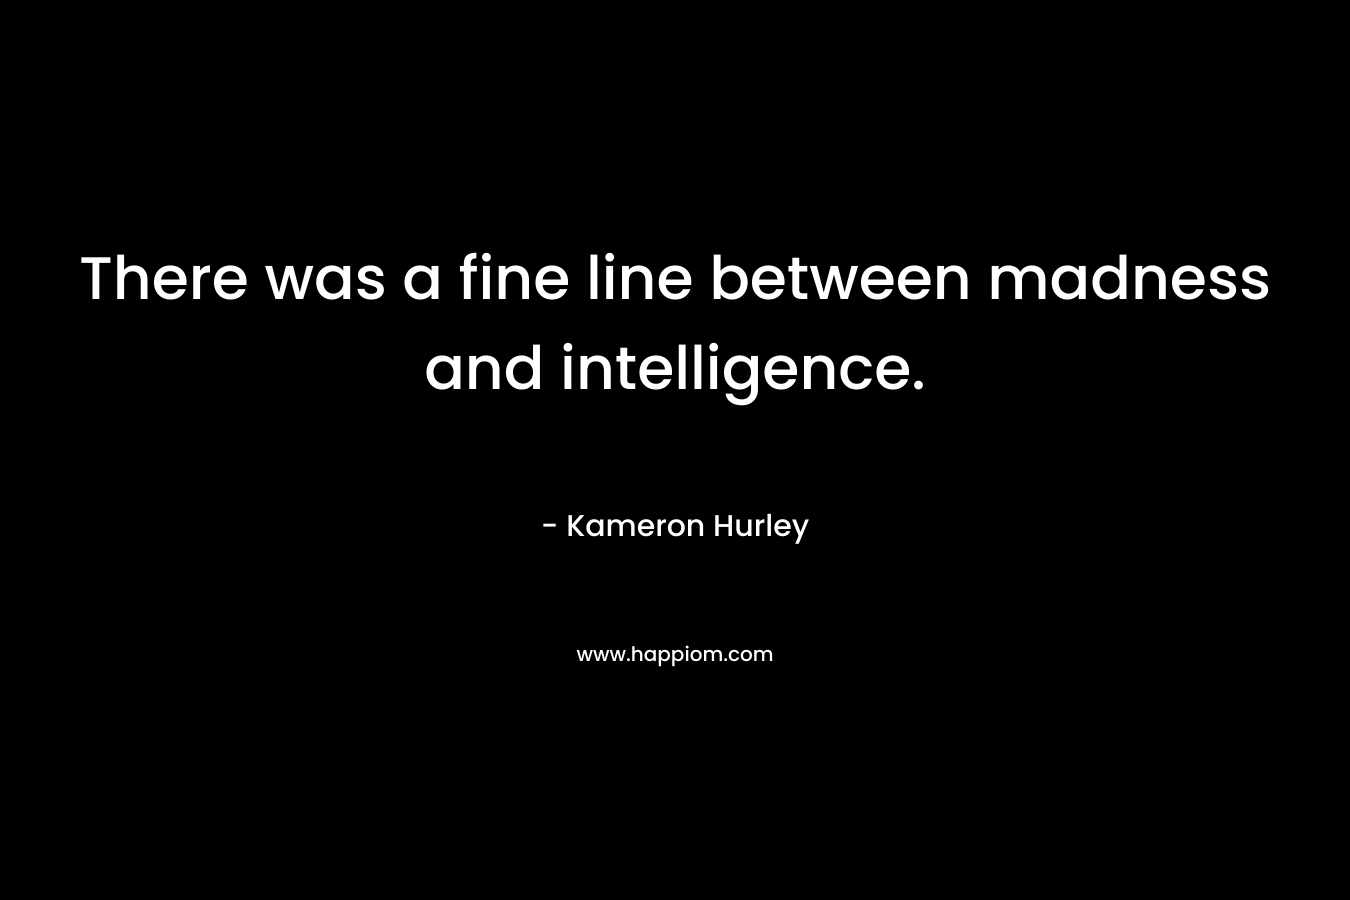 There was a fine line between madness and intelligence.